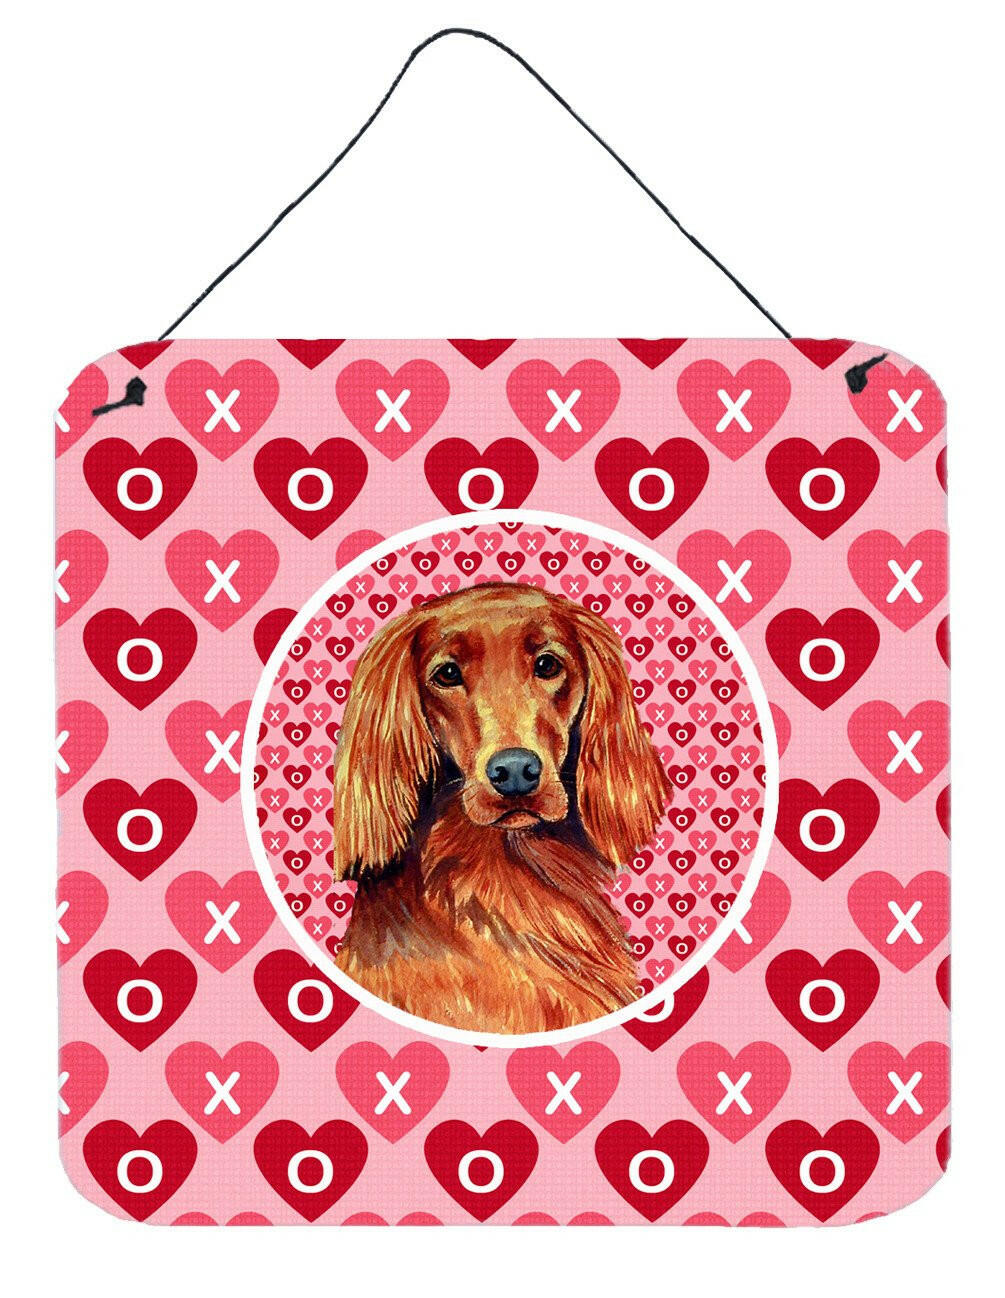 Irish Setter Valentine's Love and Hearts Wall or Door Hanging Prints by Caroline's Treasures